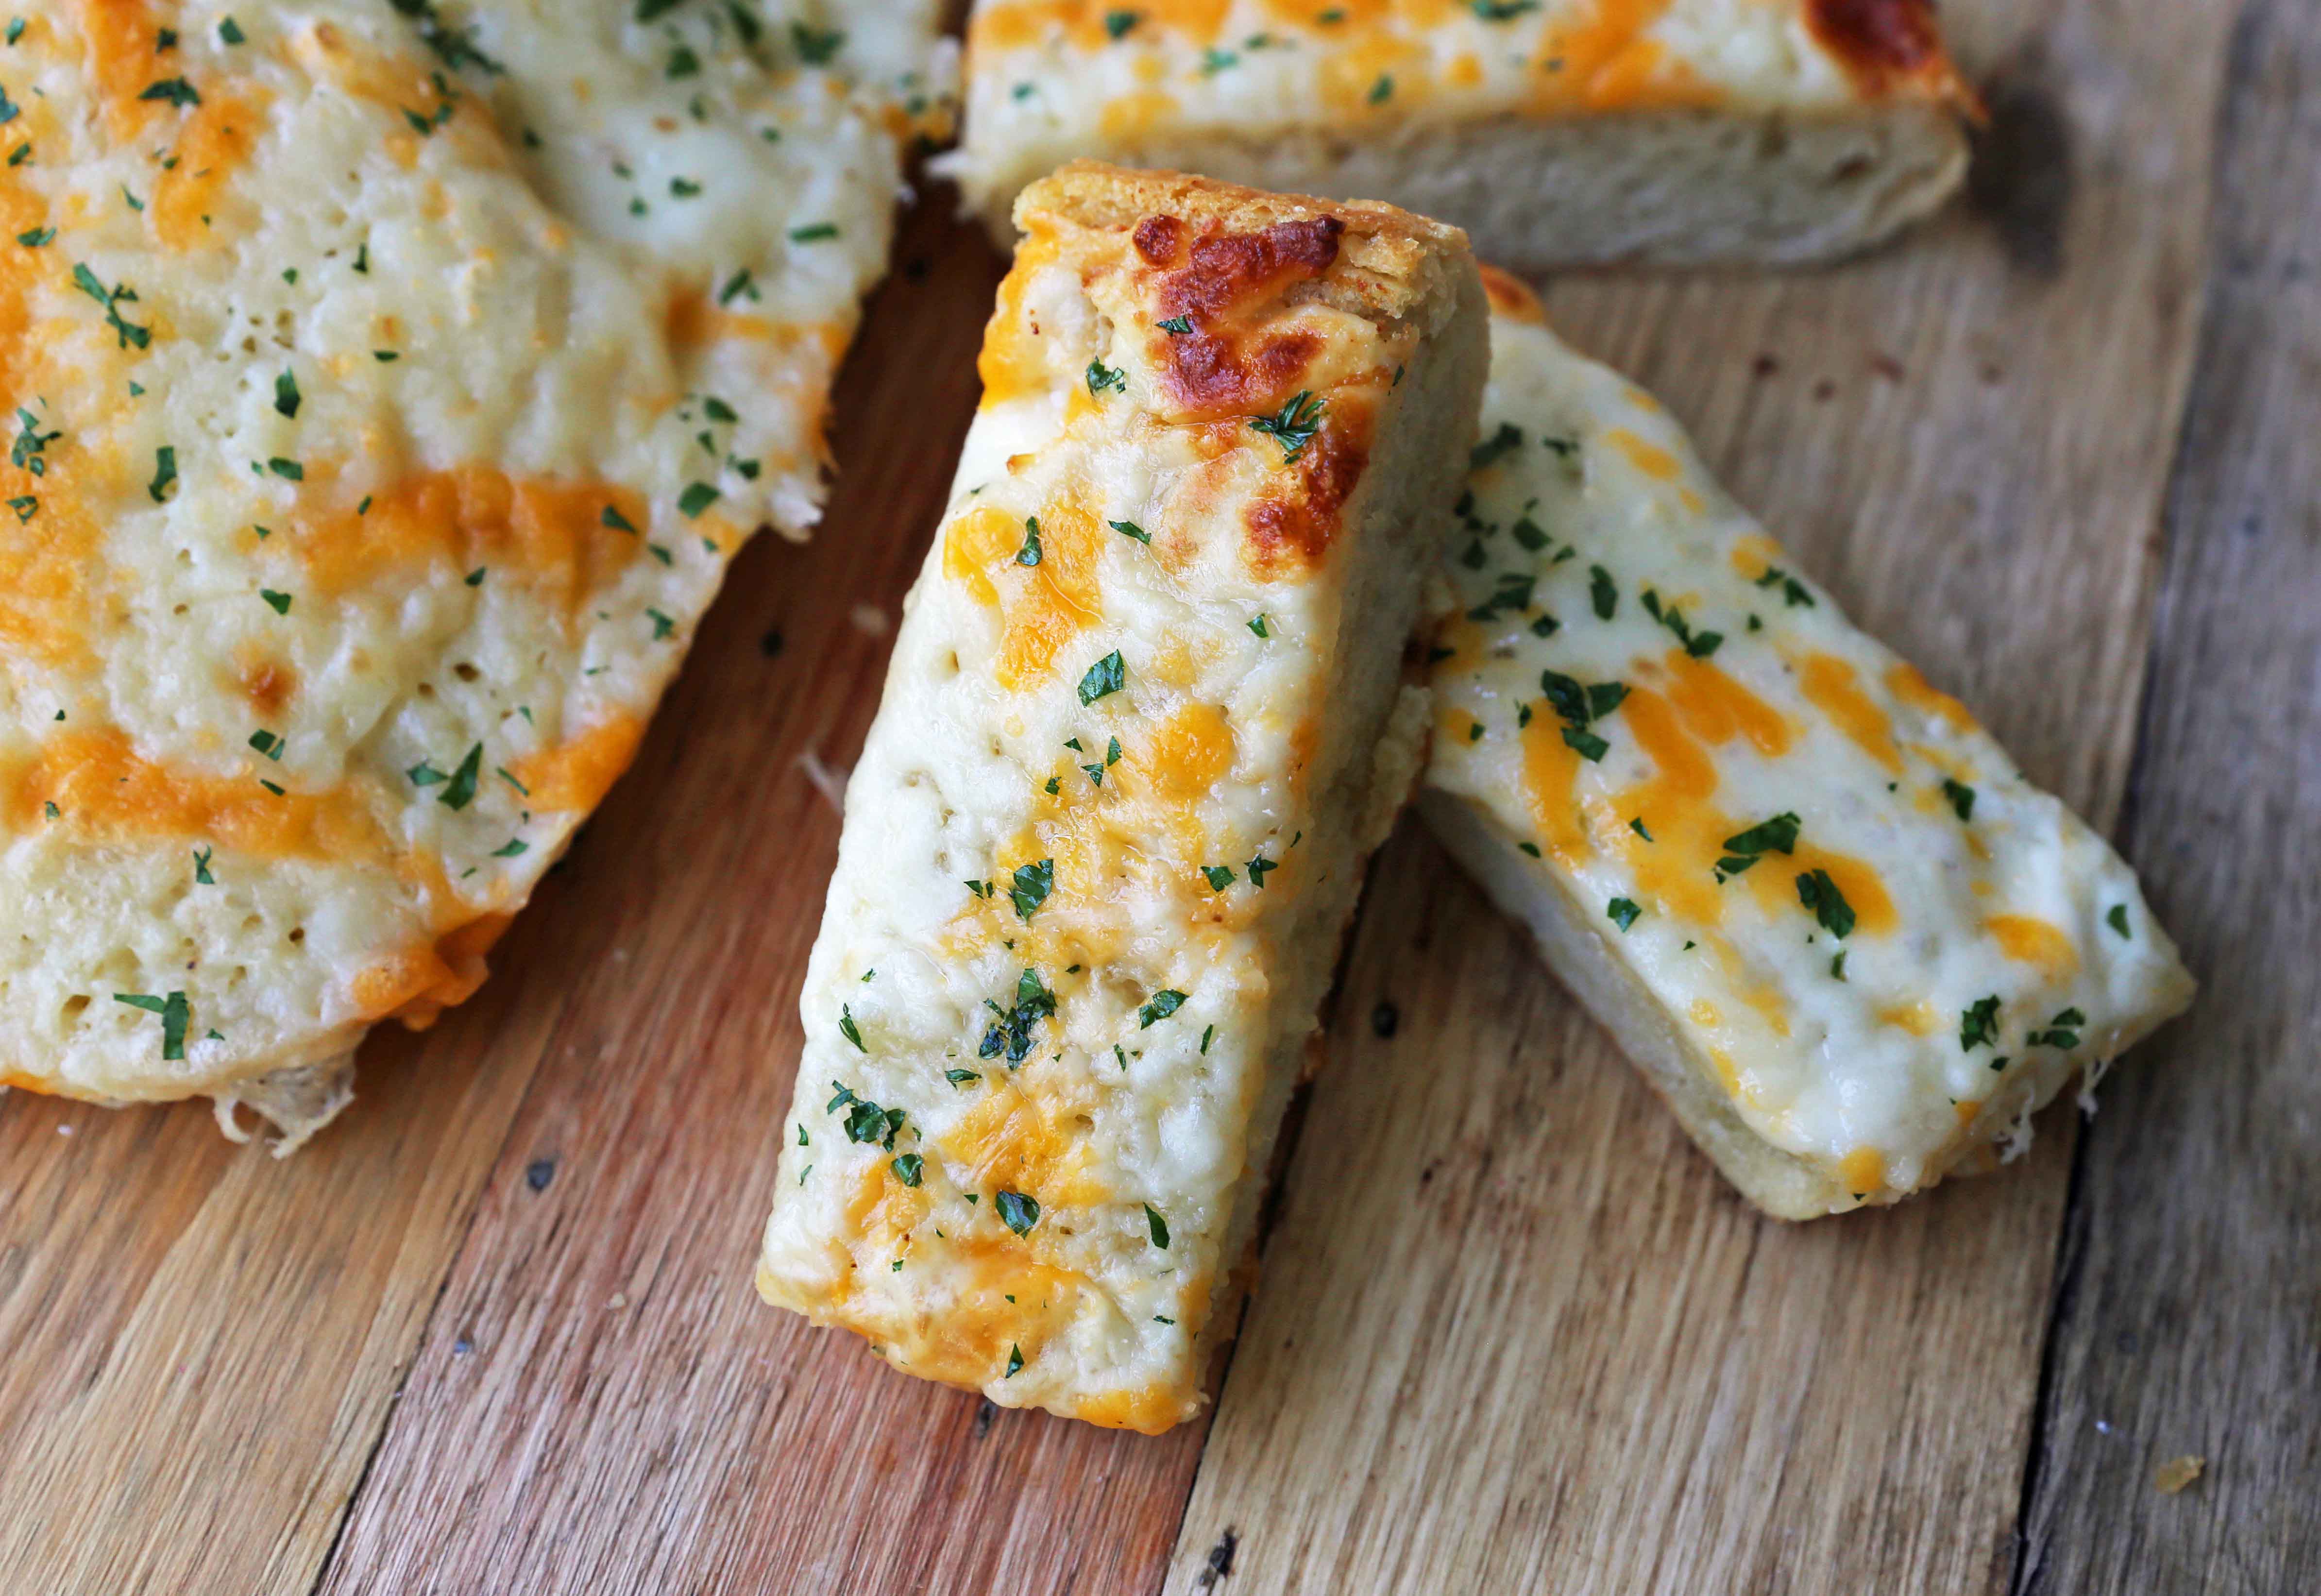 Quick and Easy Garlic Cheese Bread. Warm bread toasted and slathered with garlic butter and melted ooey gooey cheese. Garlic Cheese Bread is the perfect side dish or appetizer. www.modernhoney.com #appetizer #sidedish #garlicbread #garliccheesebread #cheesebread